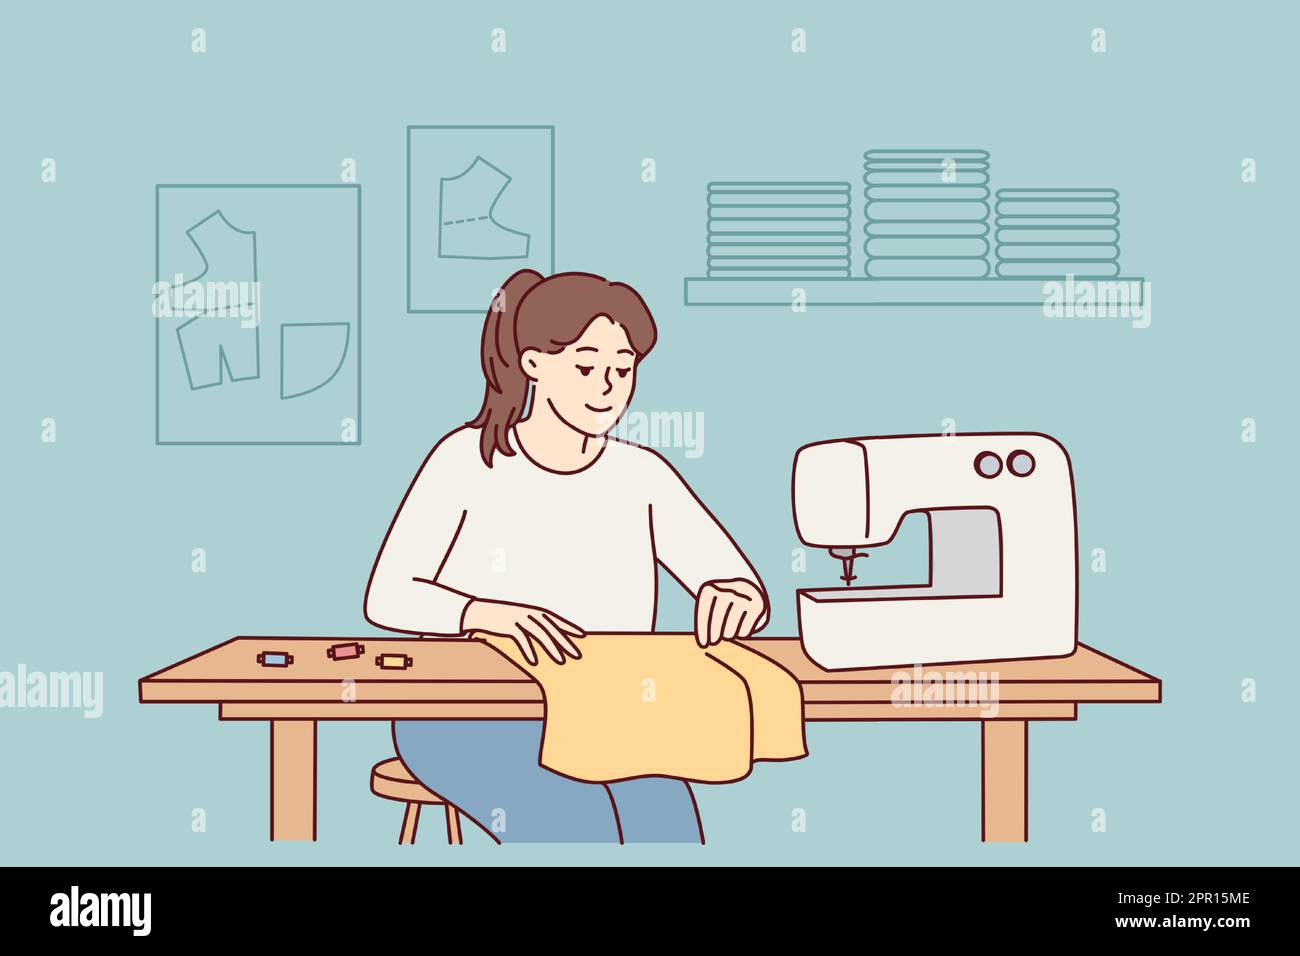 Female seamstress sewing on machine Stock Vector